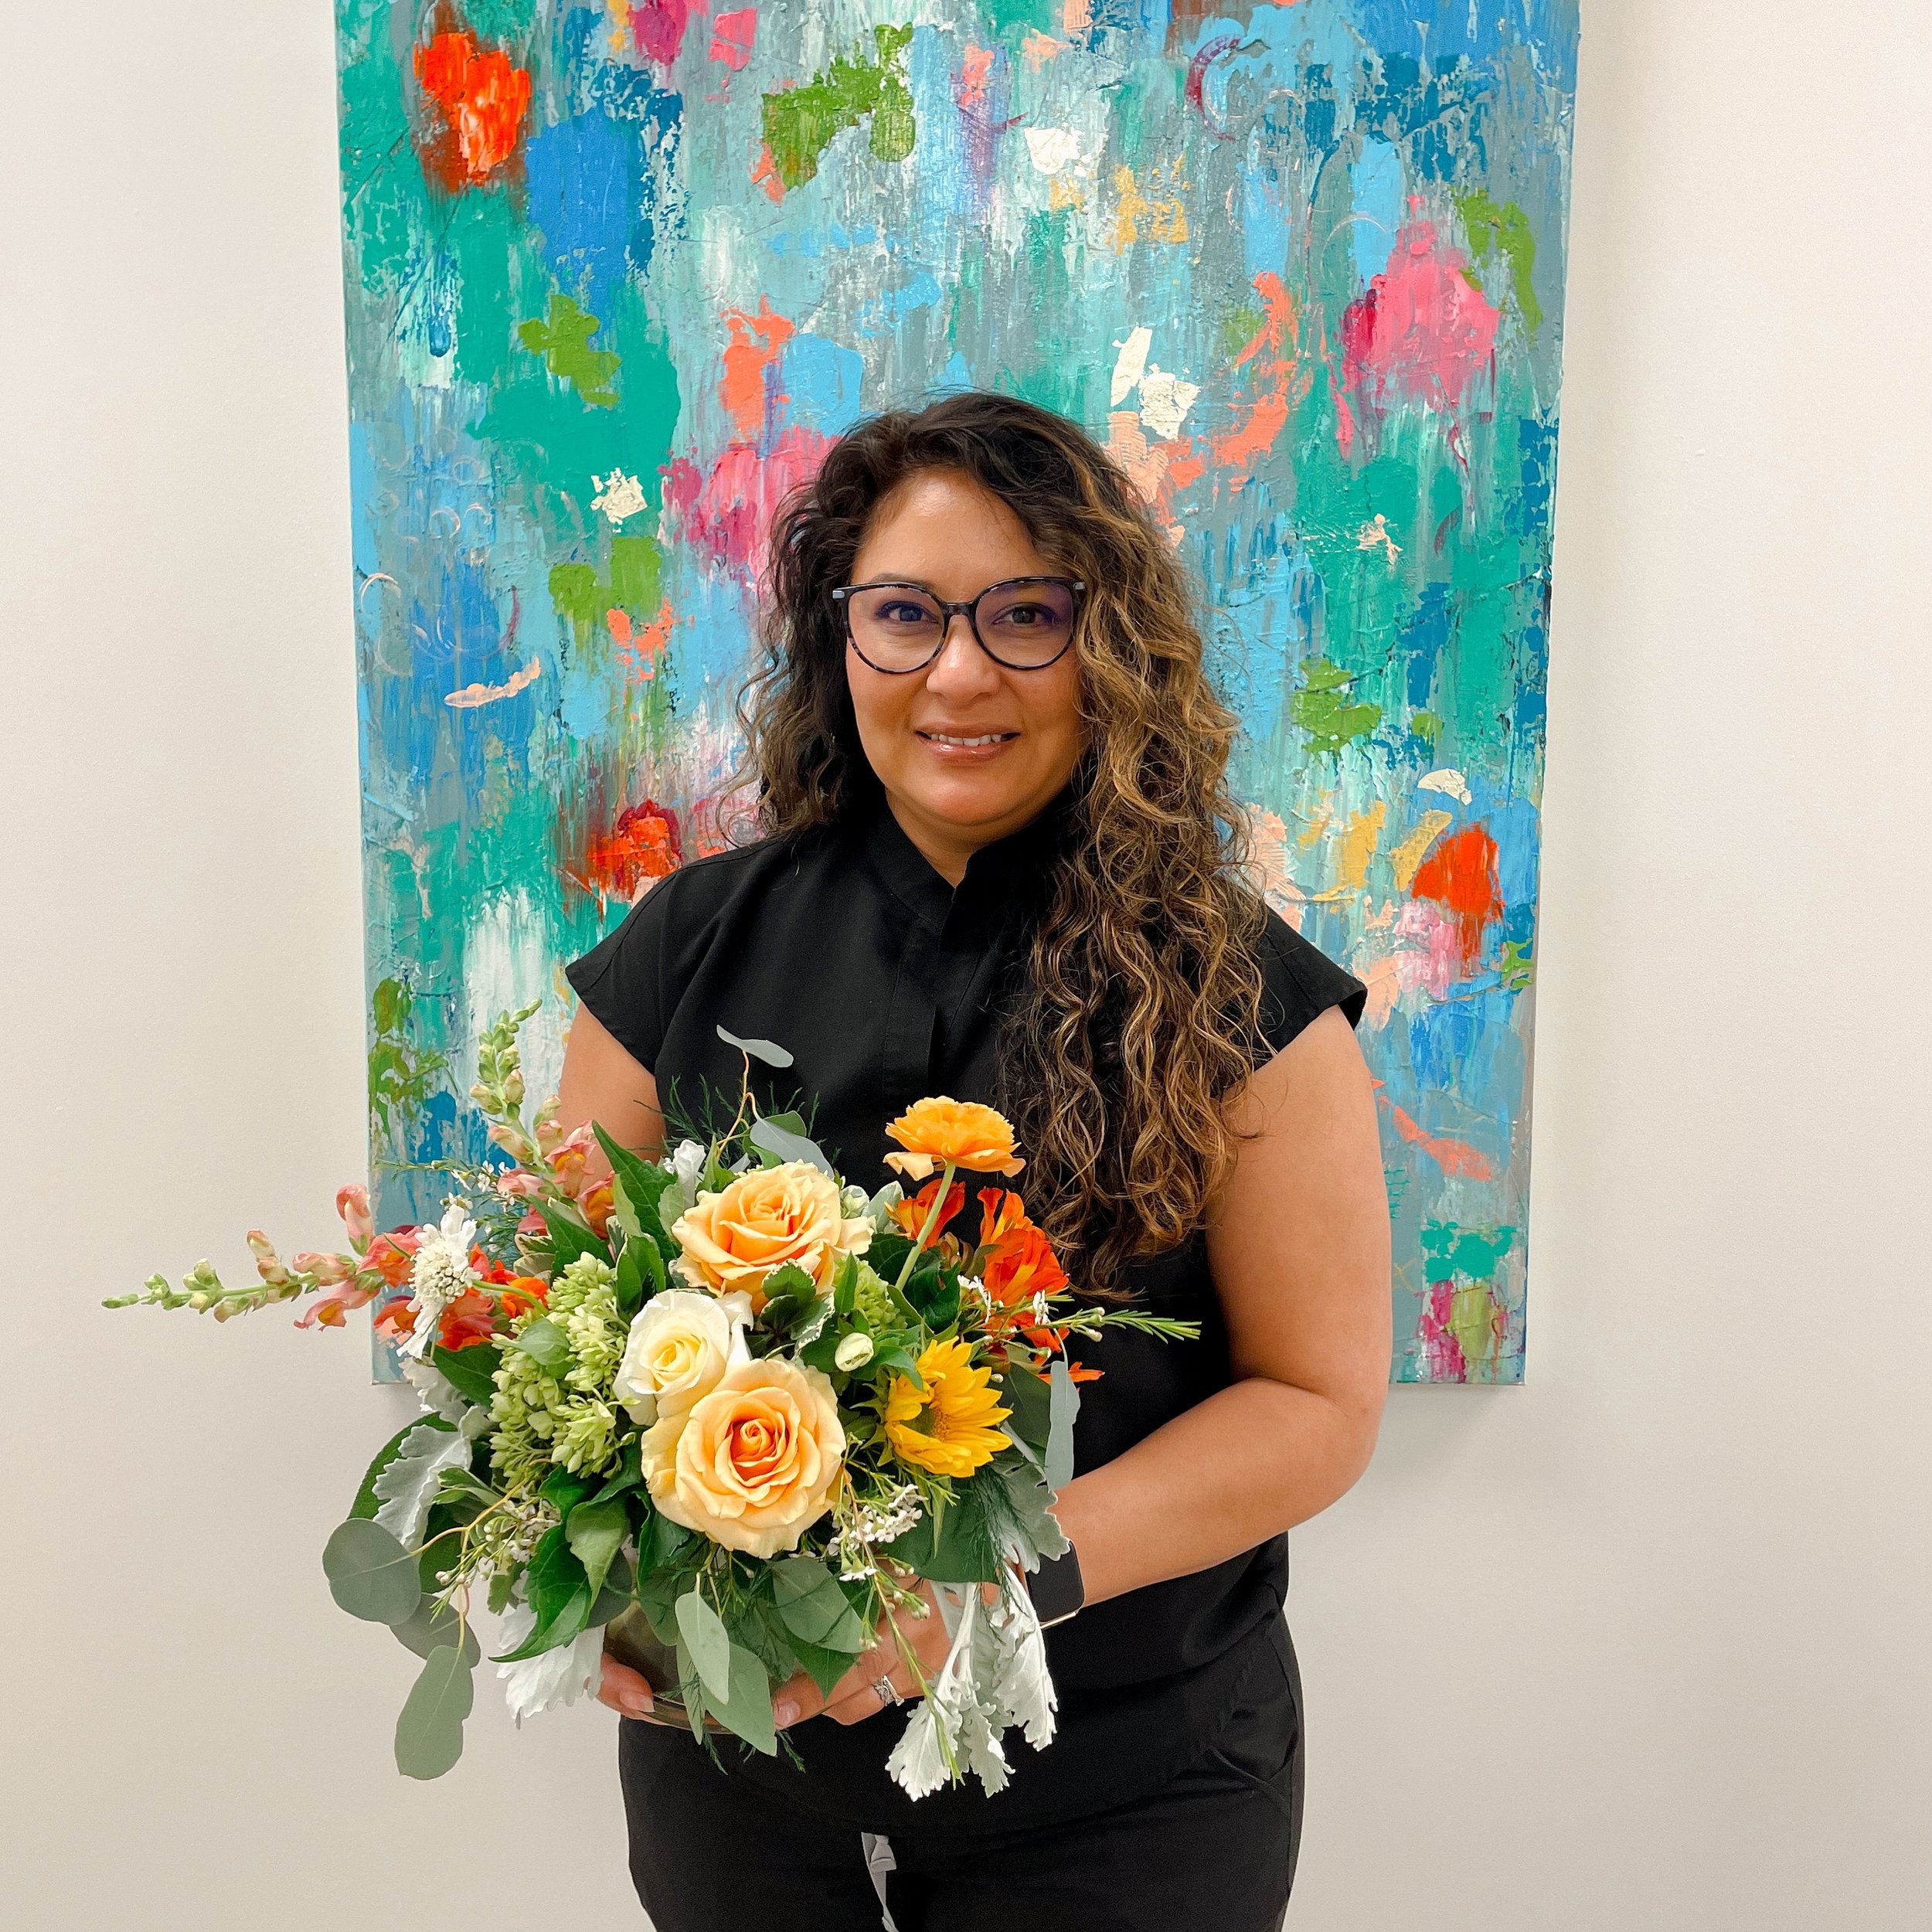 Today isn&rsquo;t just Nurse&rsquo;s Day&mdash;it&rsquo;s also a special milestone for Lupe as she marks her 5th work anniversary with us! Join us in celebrating Lupe for her dedication and hard work. Happy Anniversary, Lupe! Thank you for all that y